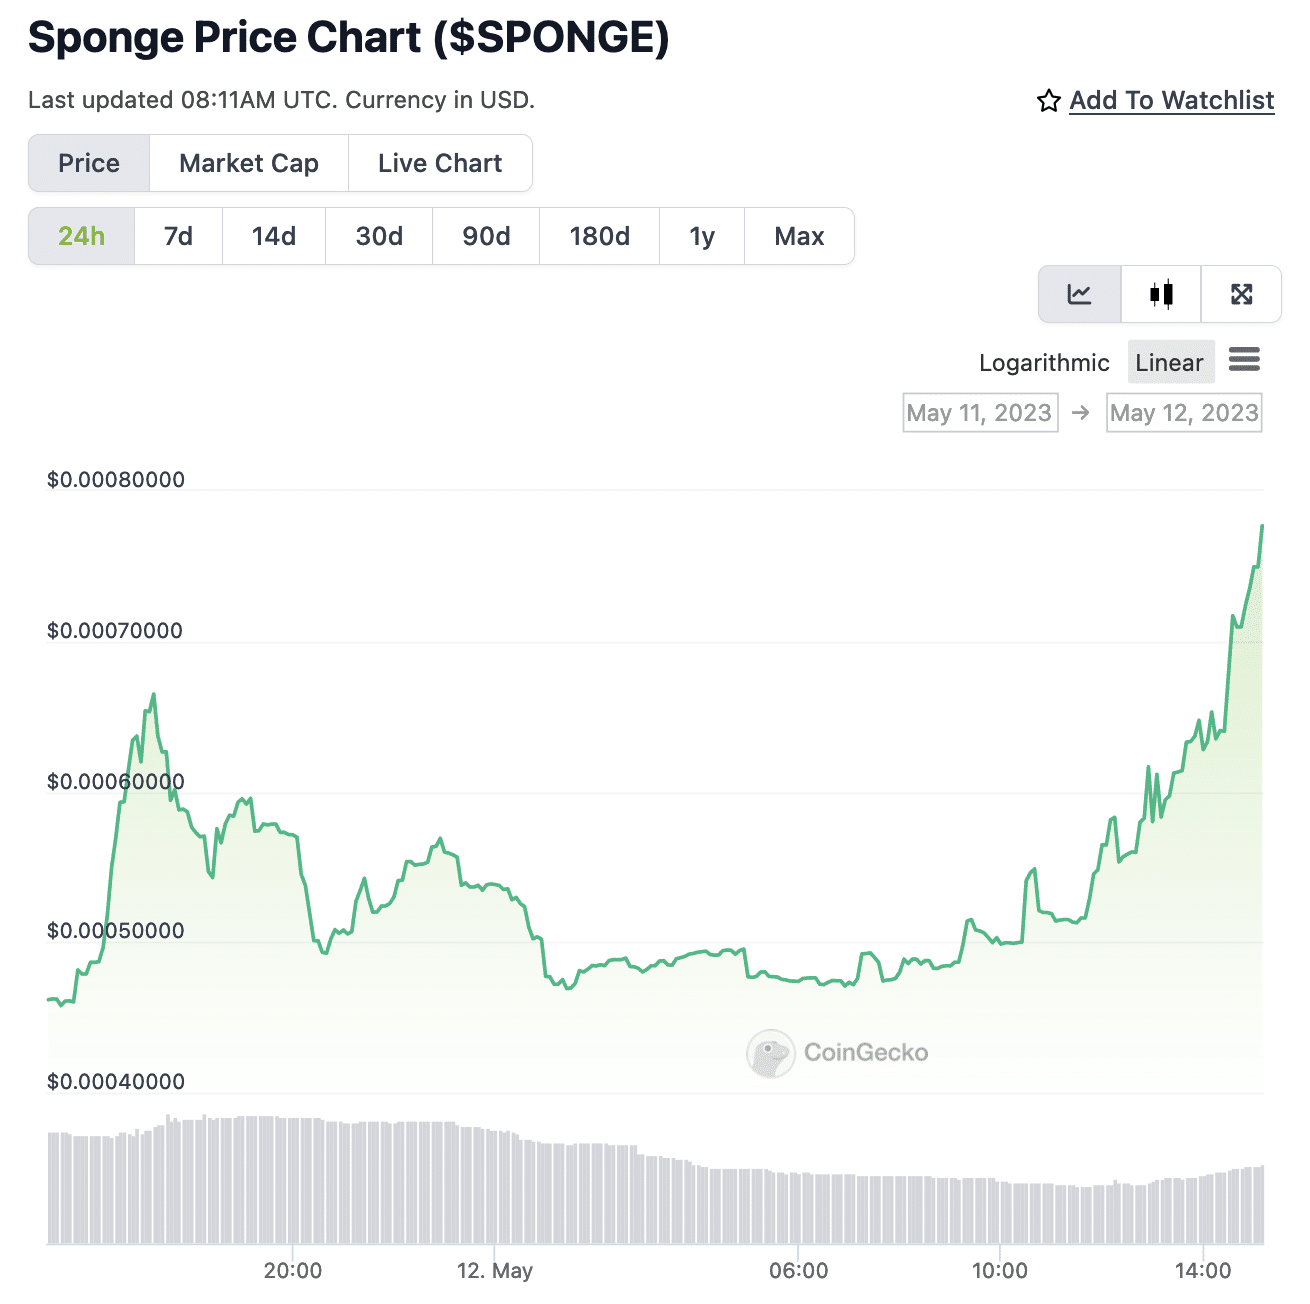 PEPE Finished? Memecoin Mania Fades While SPONGE Continues to Surge